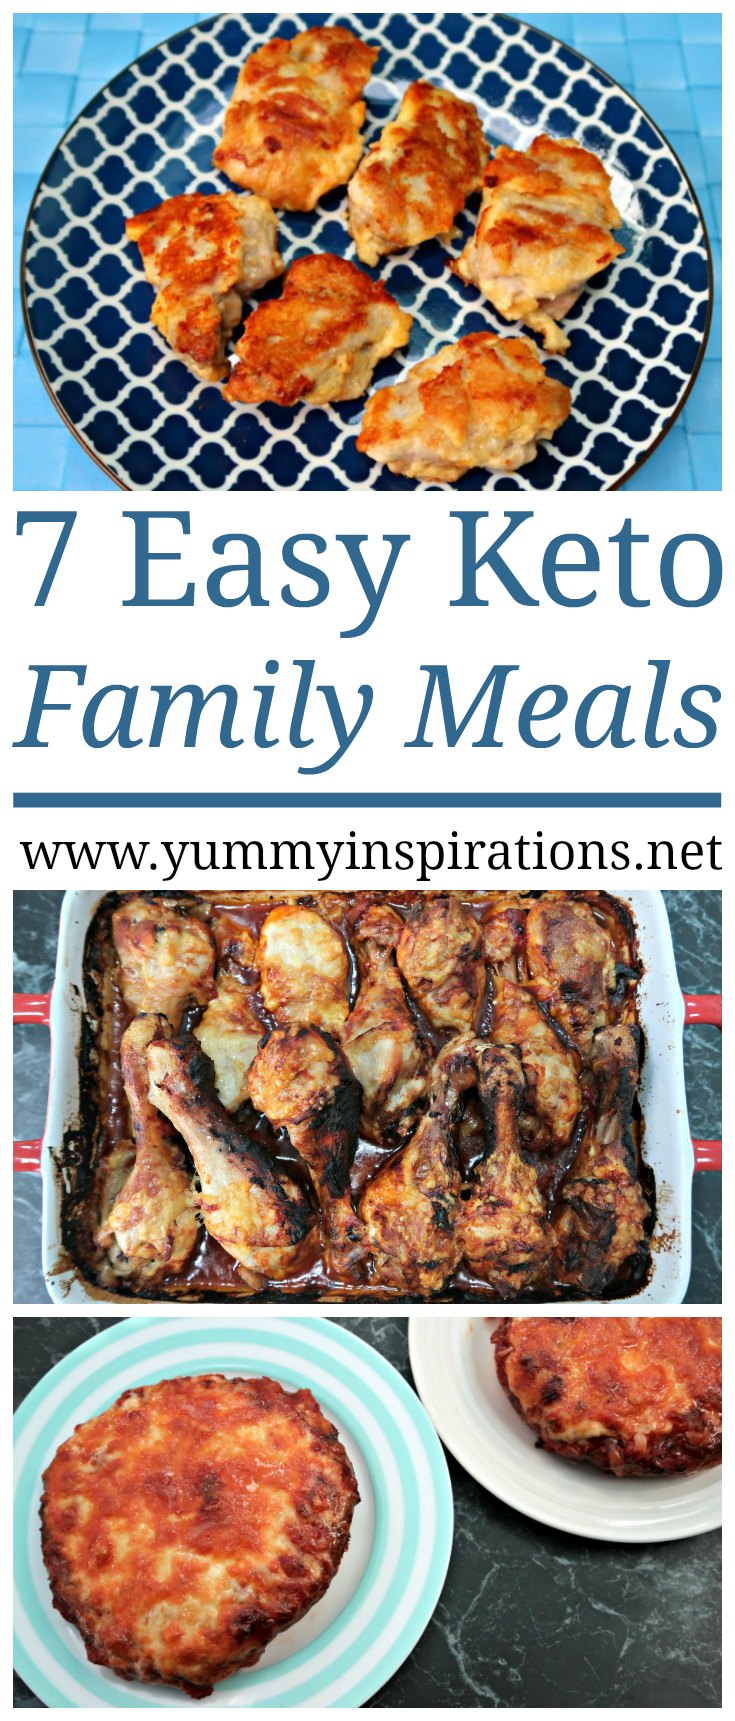 7 Keto Family Meals - Easy Low Carb Dinners that are picky eater approved